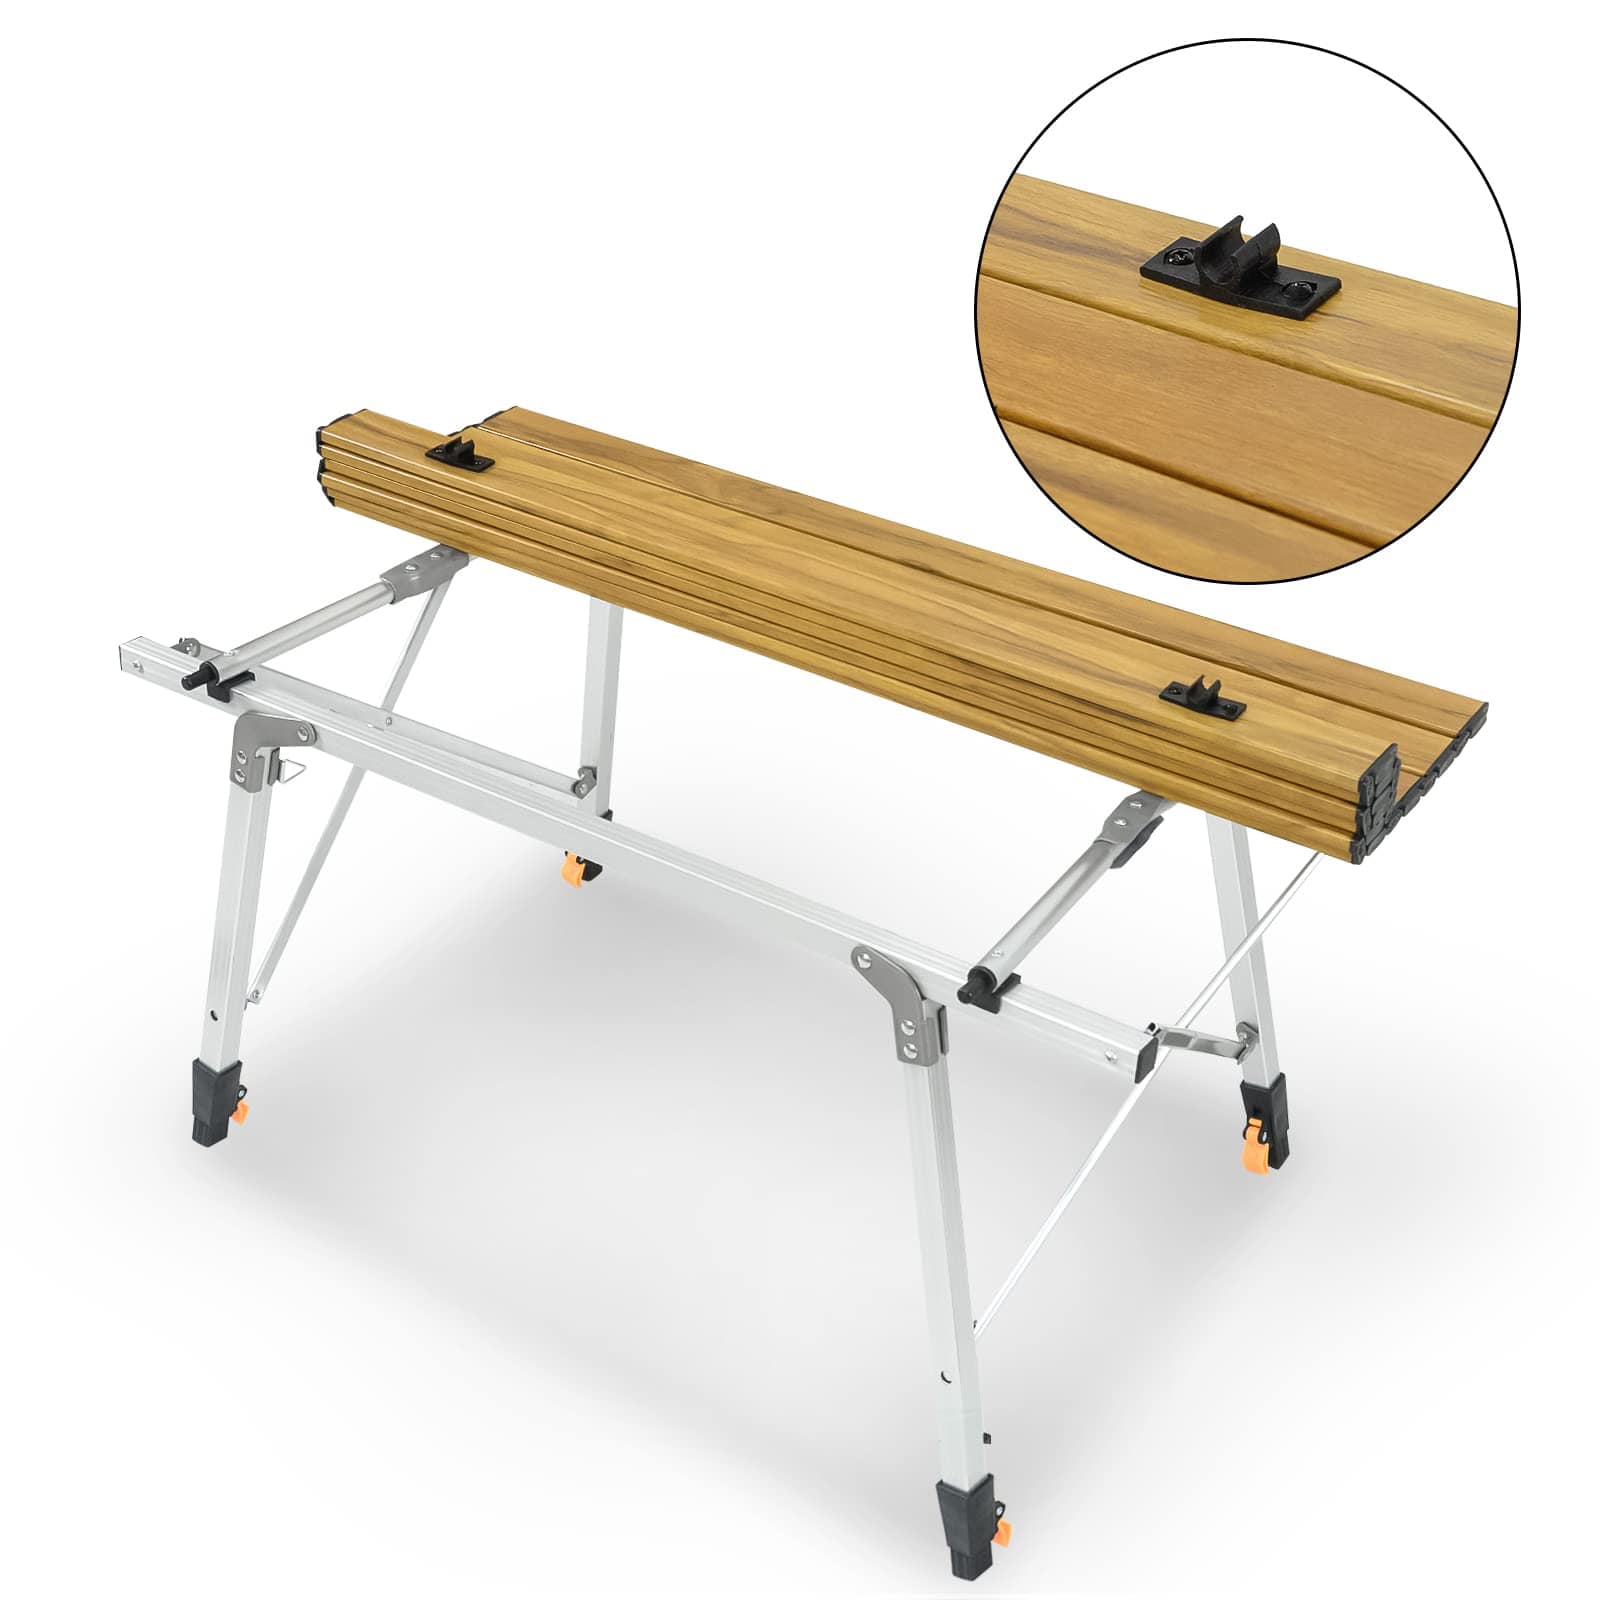 GeerTop Outdoor Store Camping tables GeerTop Faux Wood Camping Table with Hanger